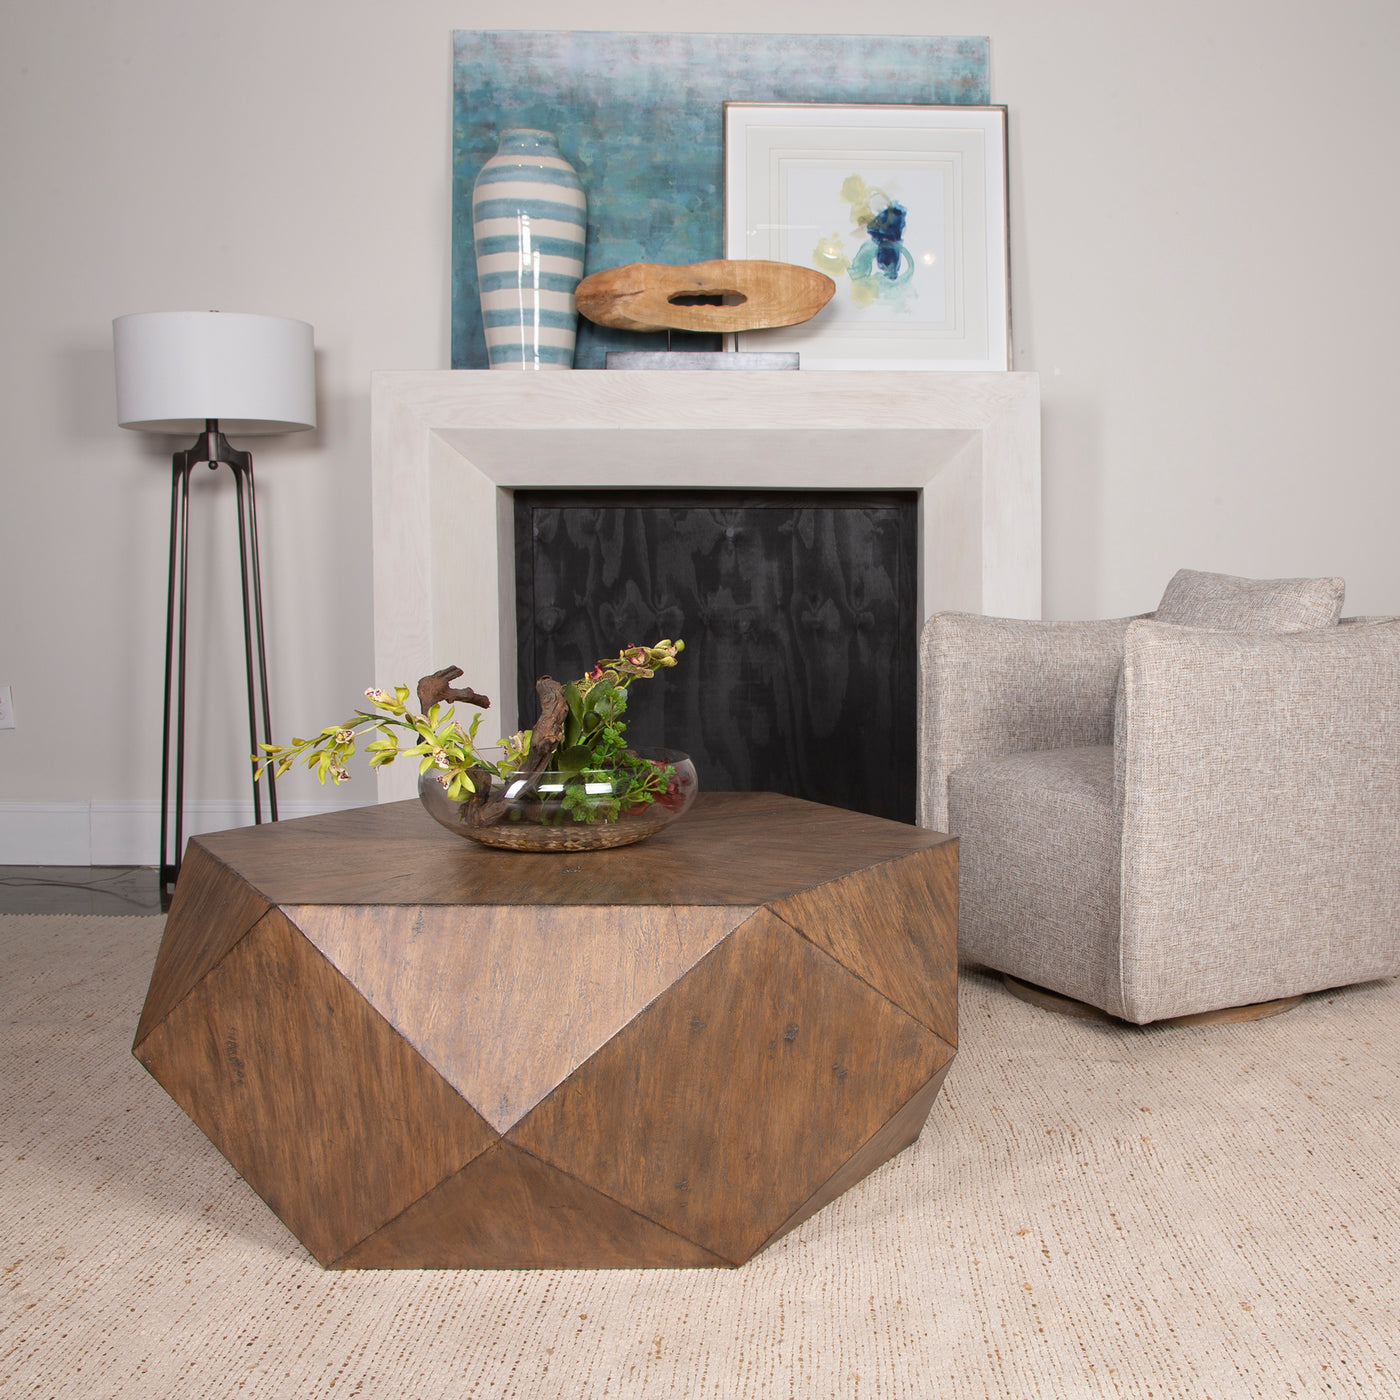 This Unique Geometric Coffee Table Features A Sunburst Top In Mango Veneer Finished In Burnished Honey With A Subtle Light...